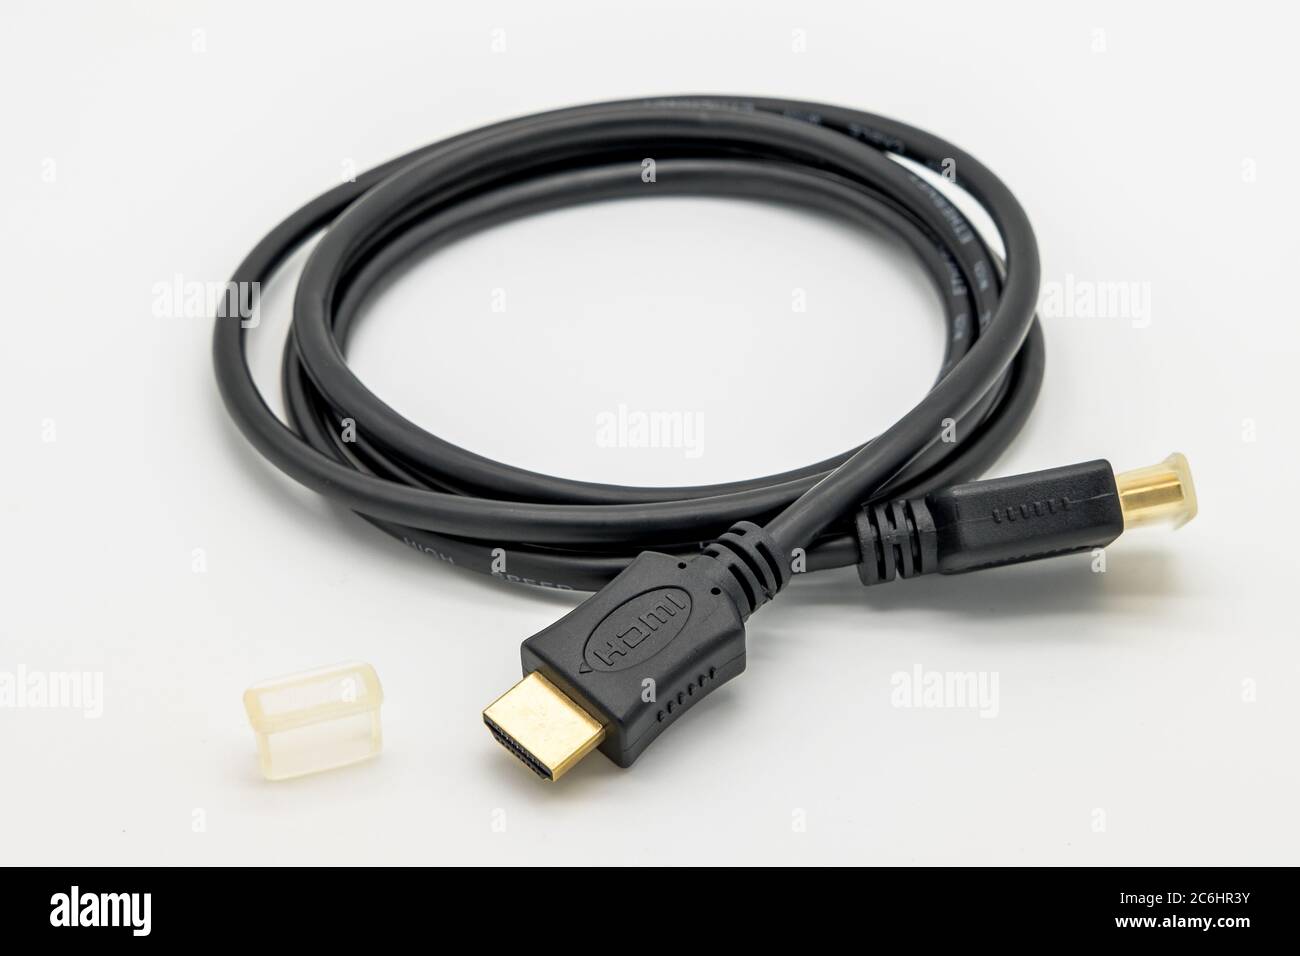 Detailed image of a high-performance HDMI computer and TV connection cable.  The gold plated HDMI connectors are visible as are the dust caps Stock  Photo - Alamy